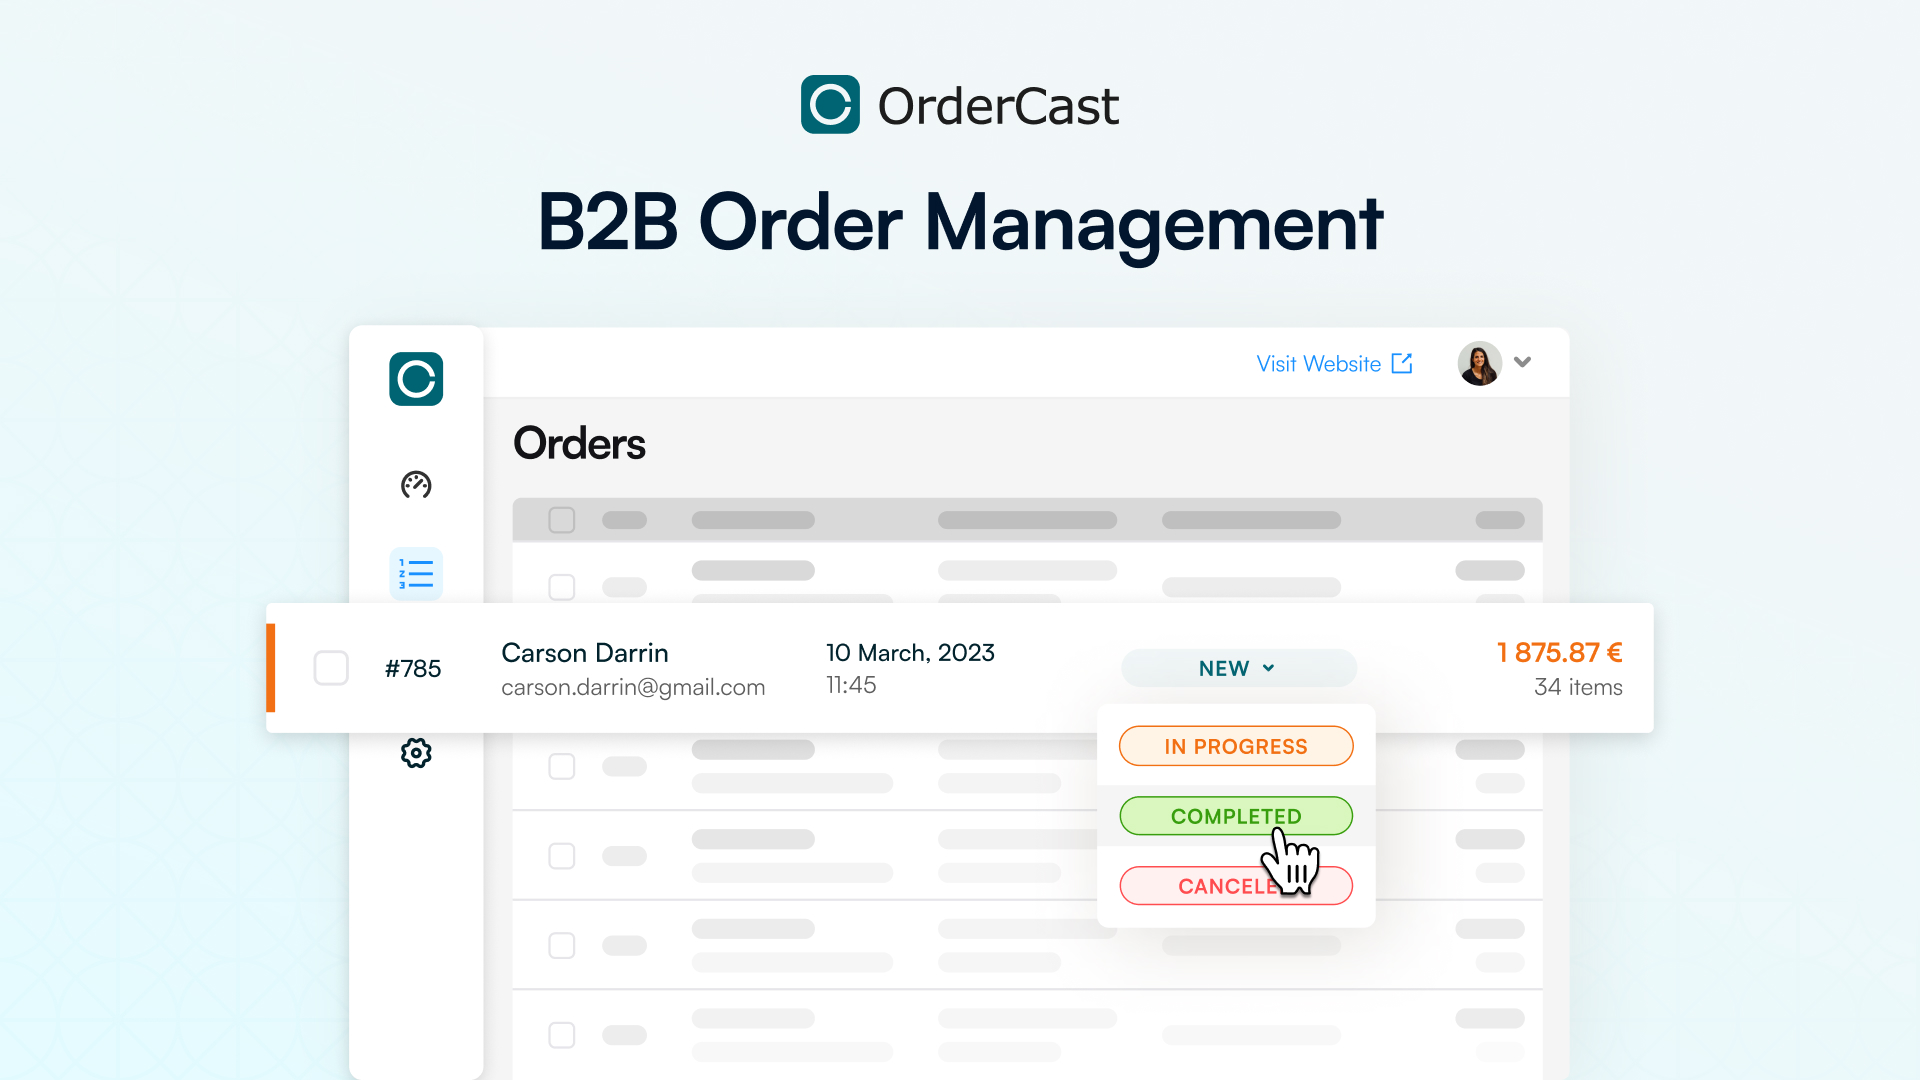 B2B Order Management by OrderCast